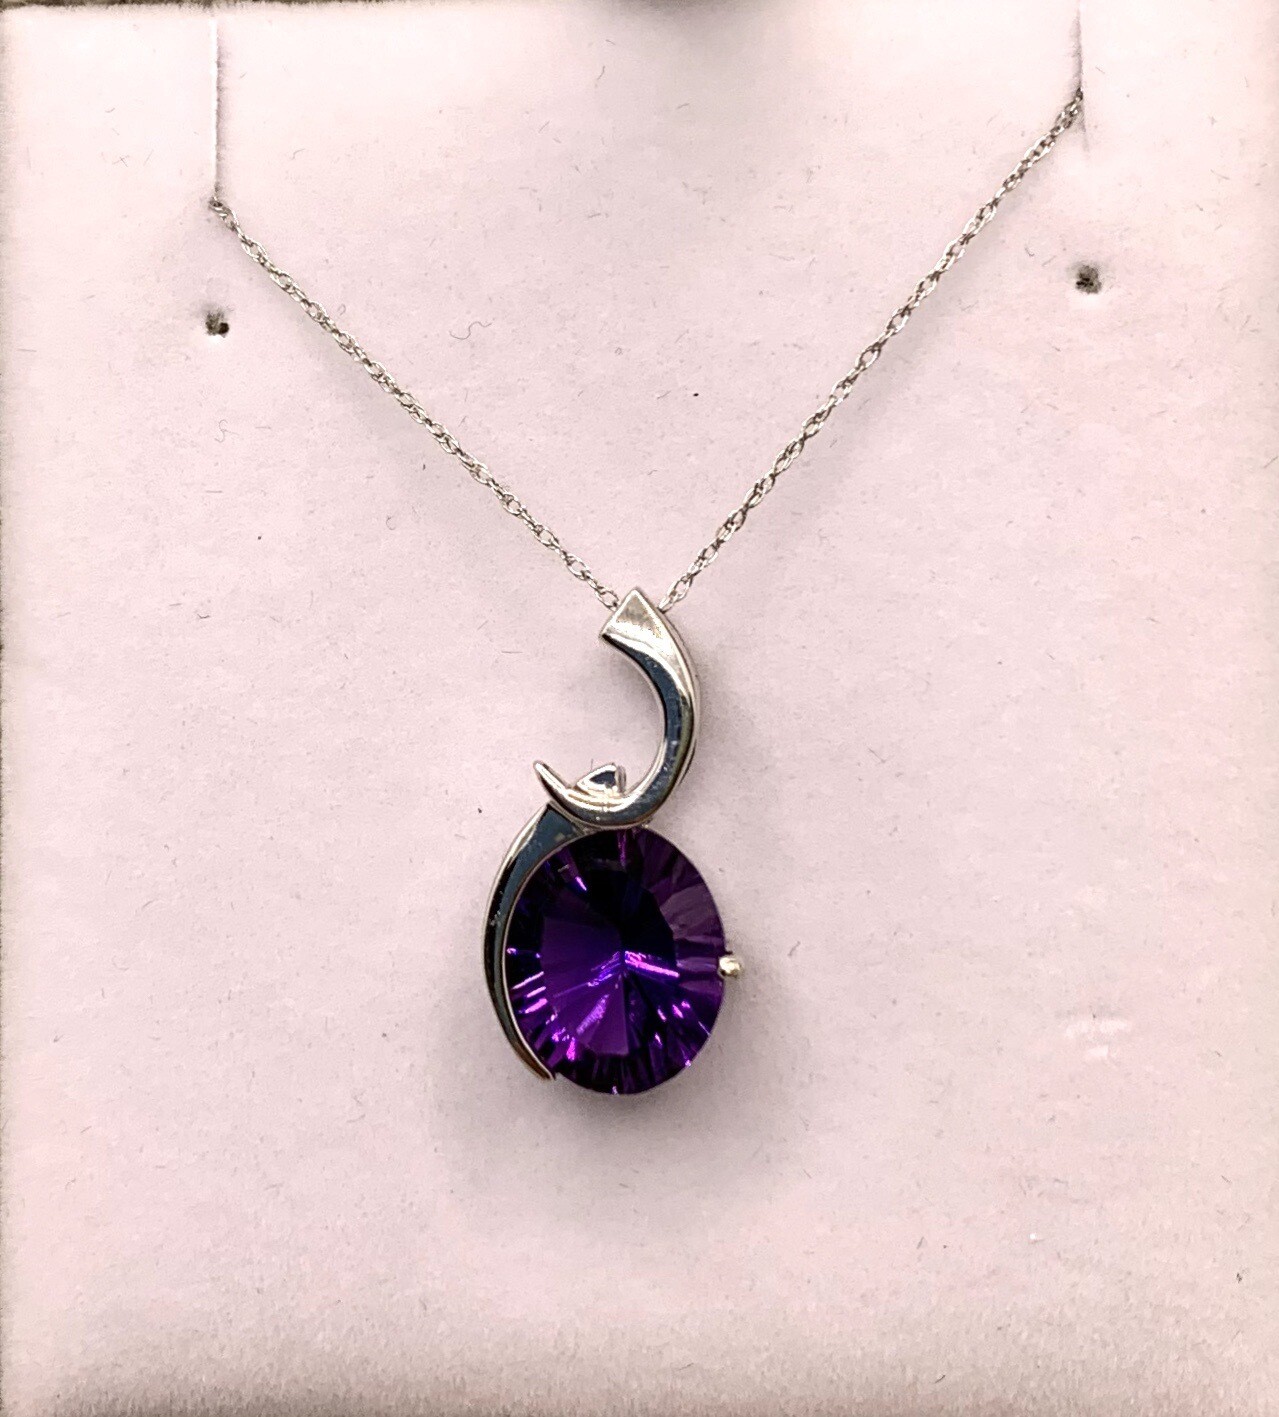 Amethyst Necklace 4.5 Ct set in 14 Kt. White Gold